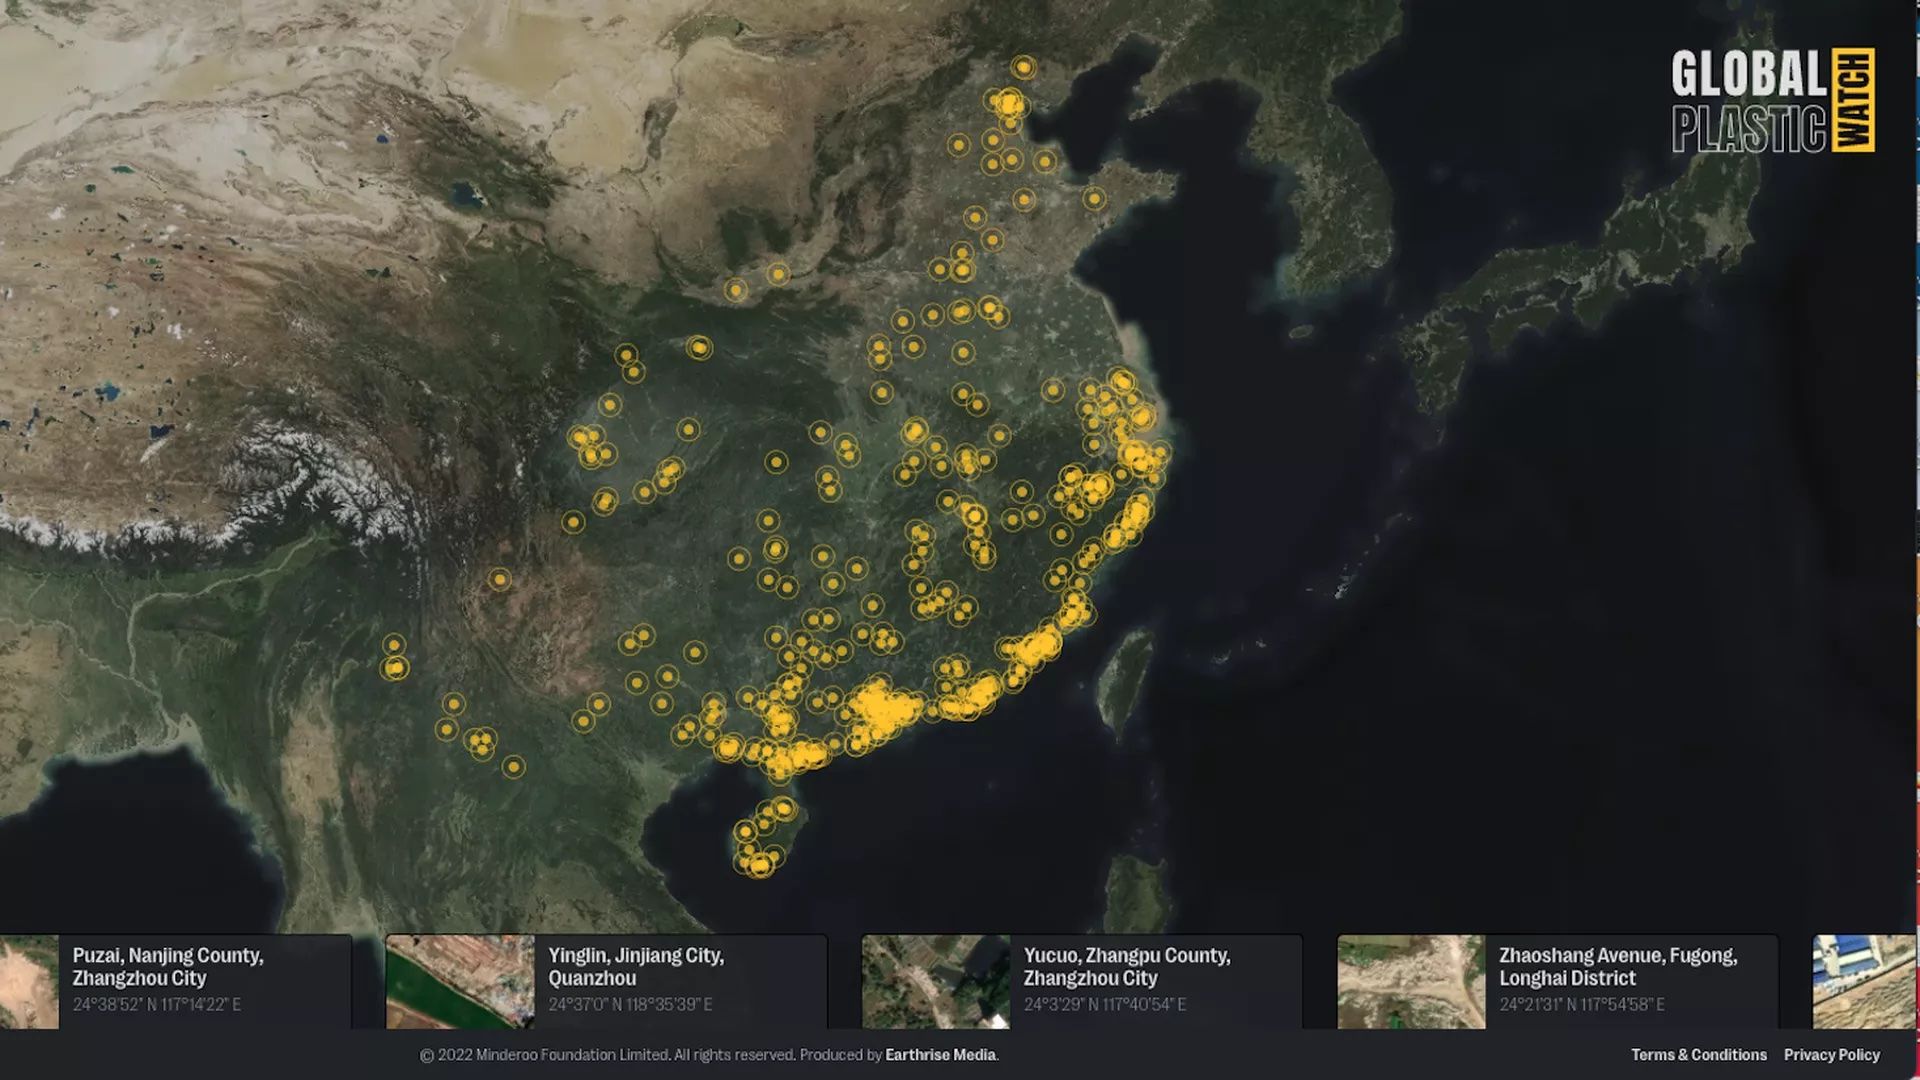 plastic waste sites in China